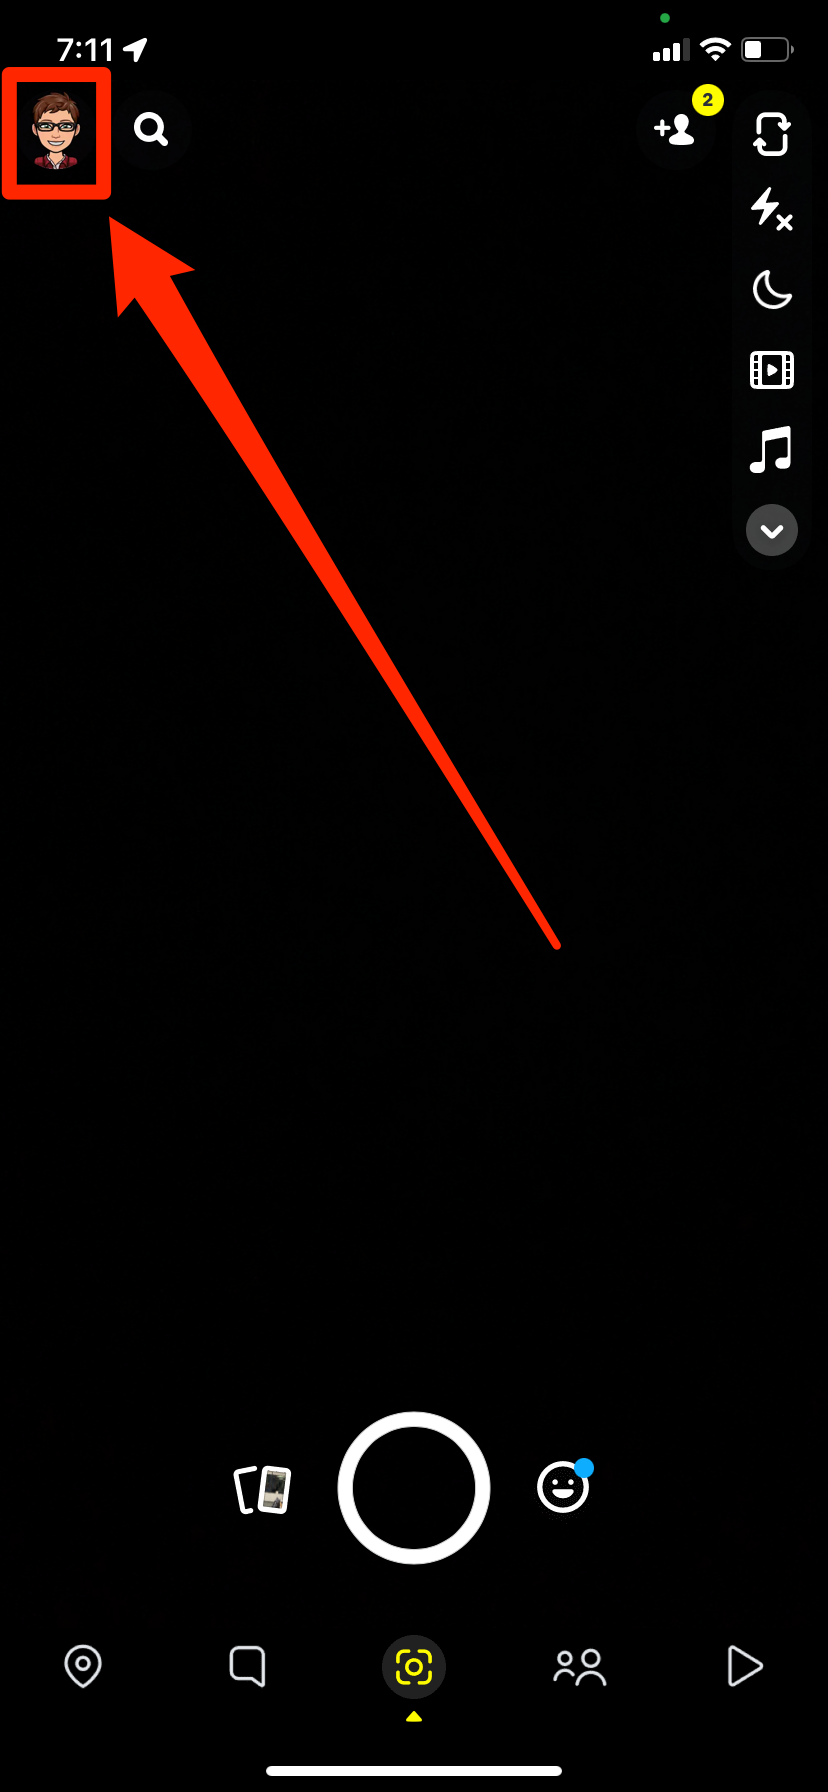 The main Snapchat page, with the user's profile picture in the top-left corner highlighted.